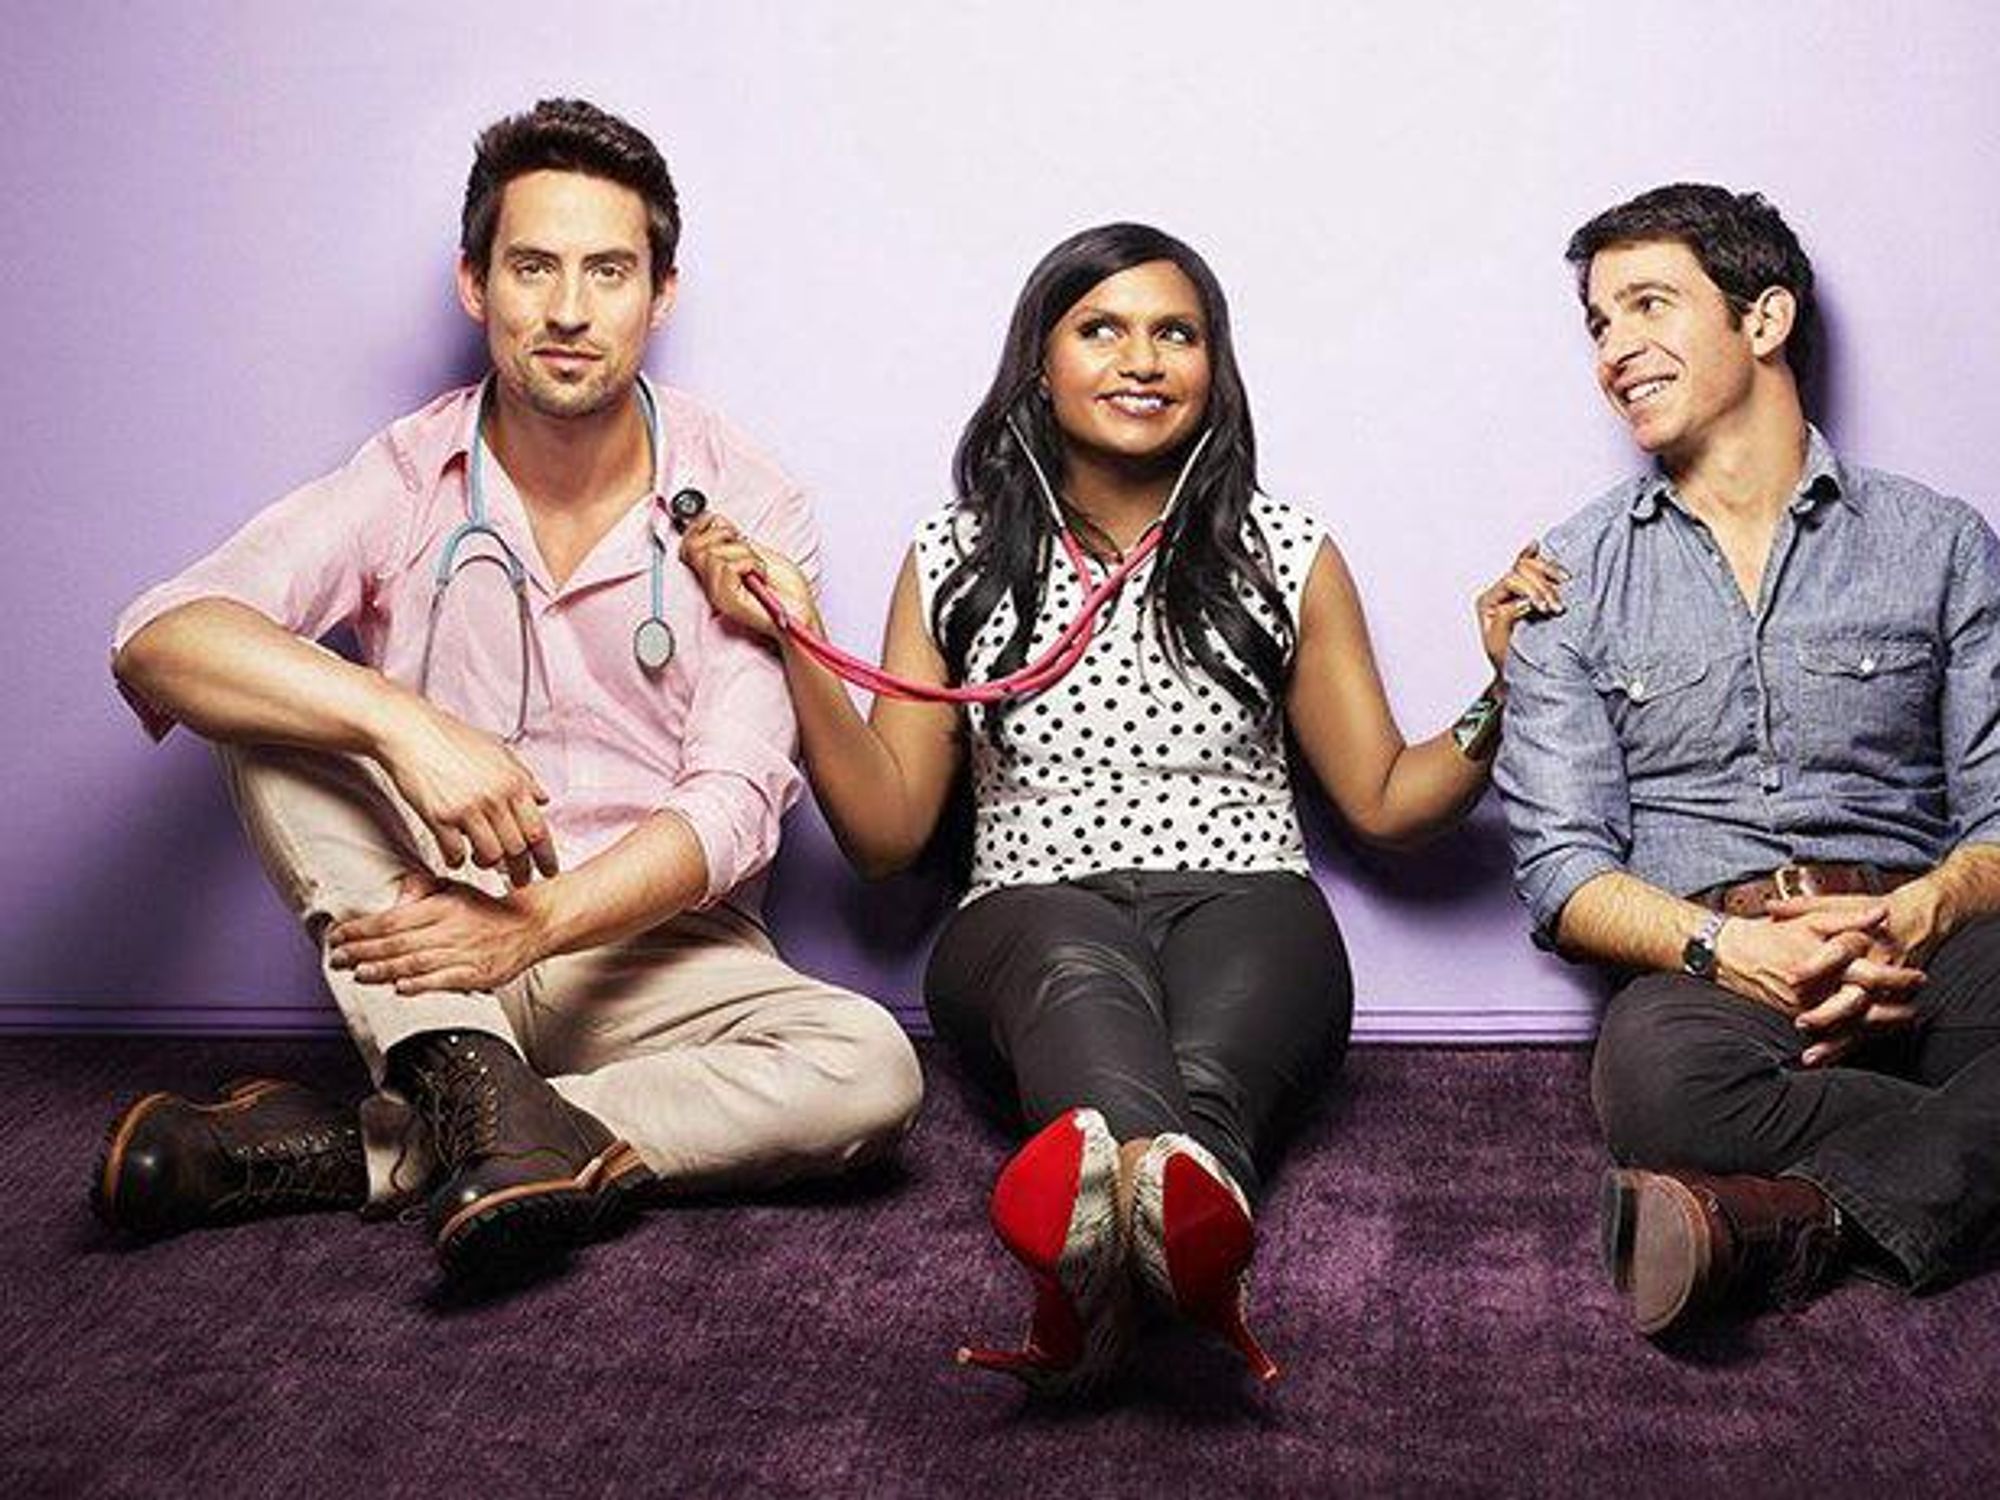 Austin photo: News_Fall TV preview_Mindy Project